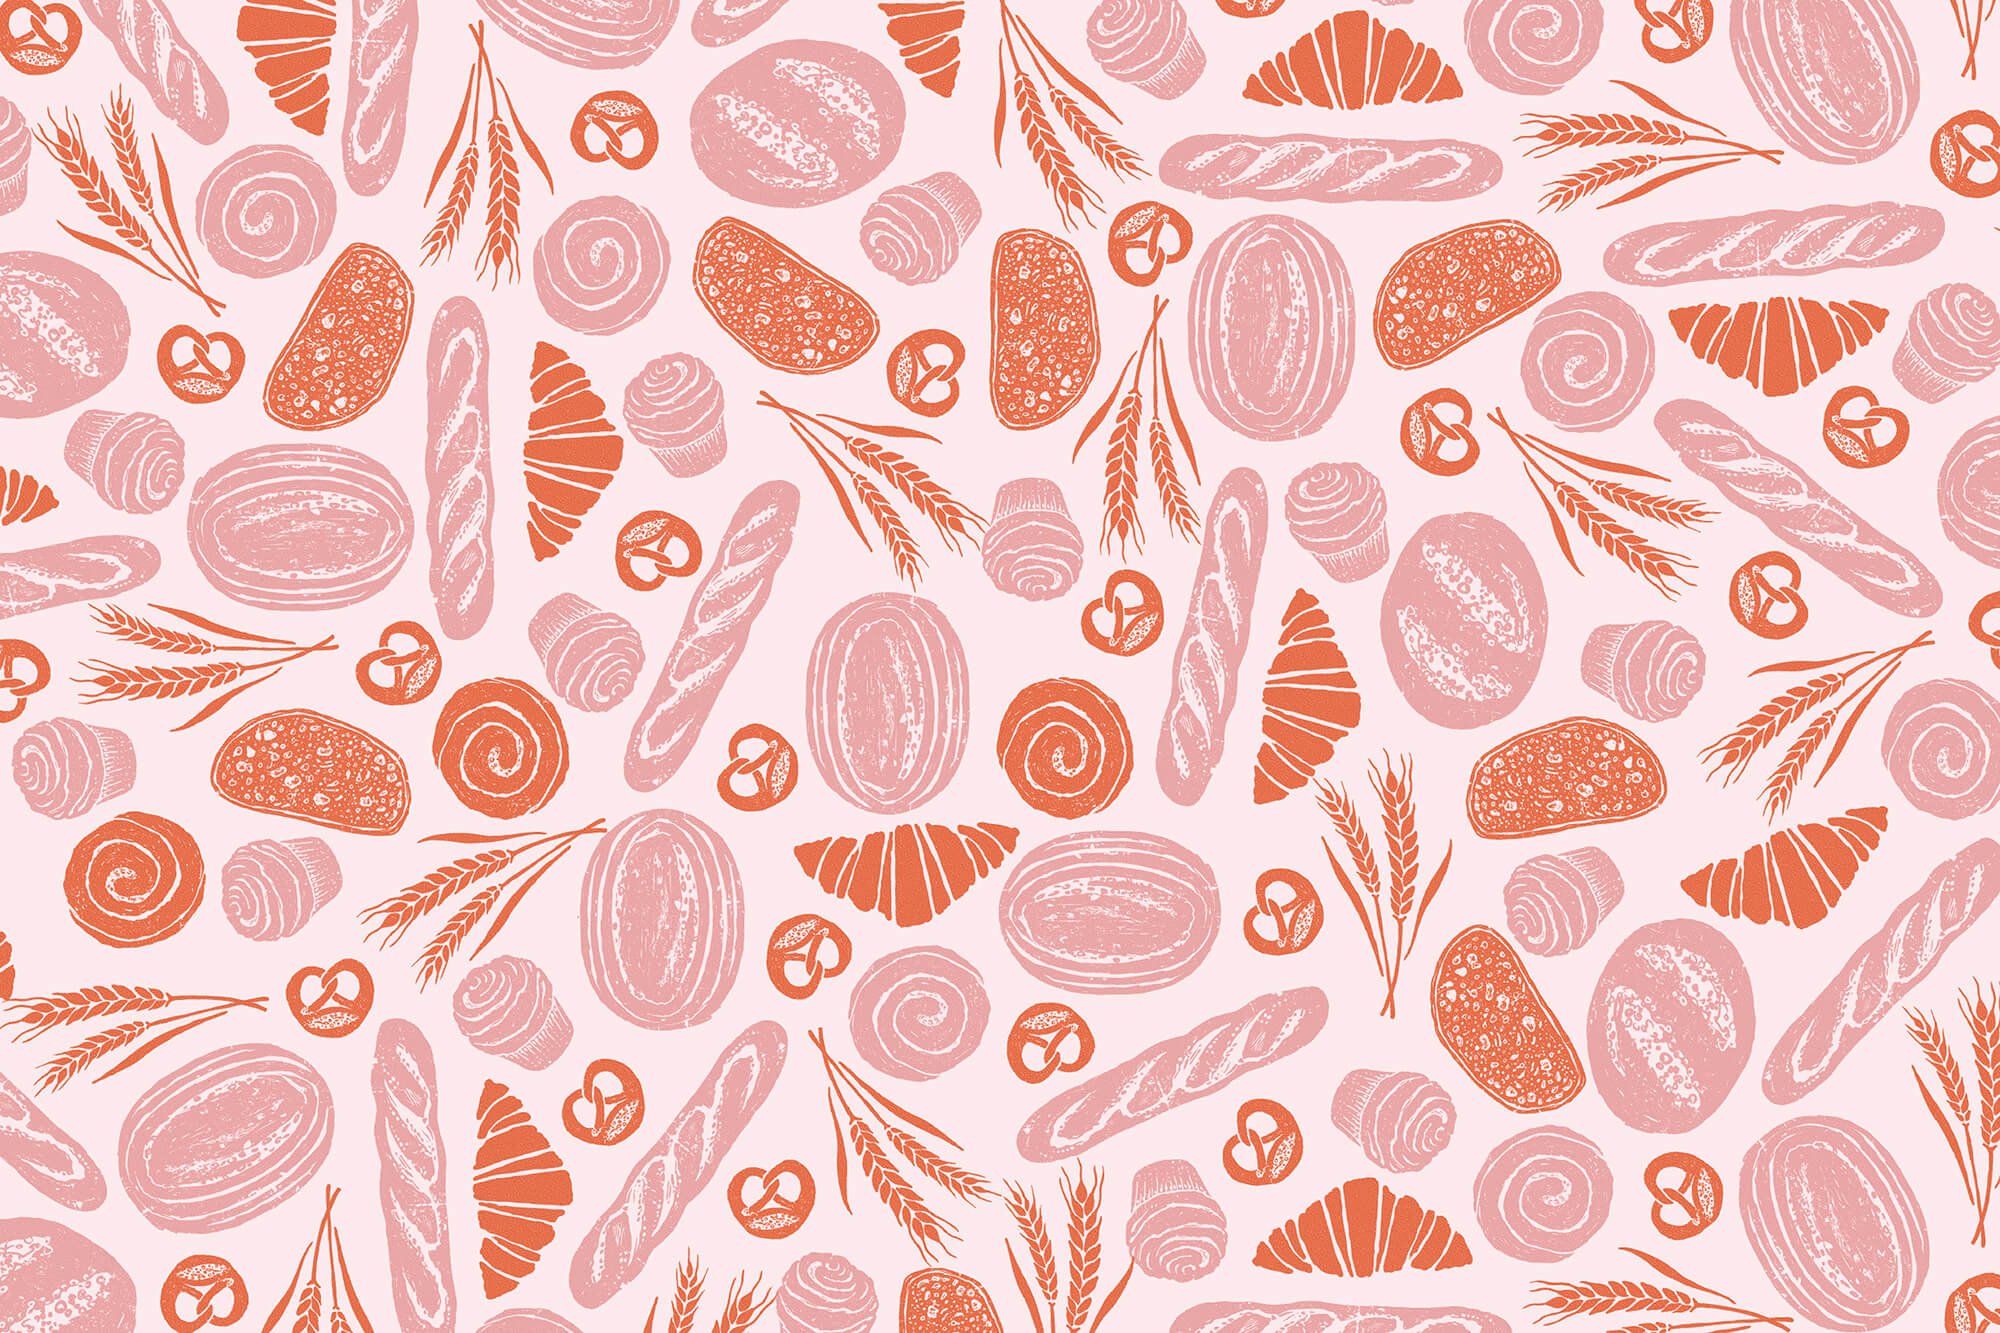  Pattern illustration for packaging for a bakery in pinks and orange with a hand drawn and textured feel. 